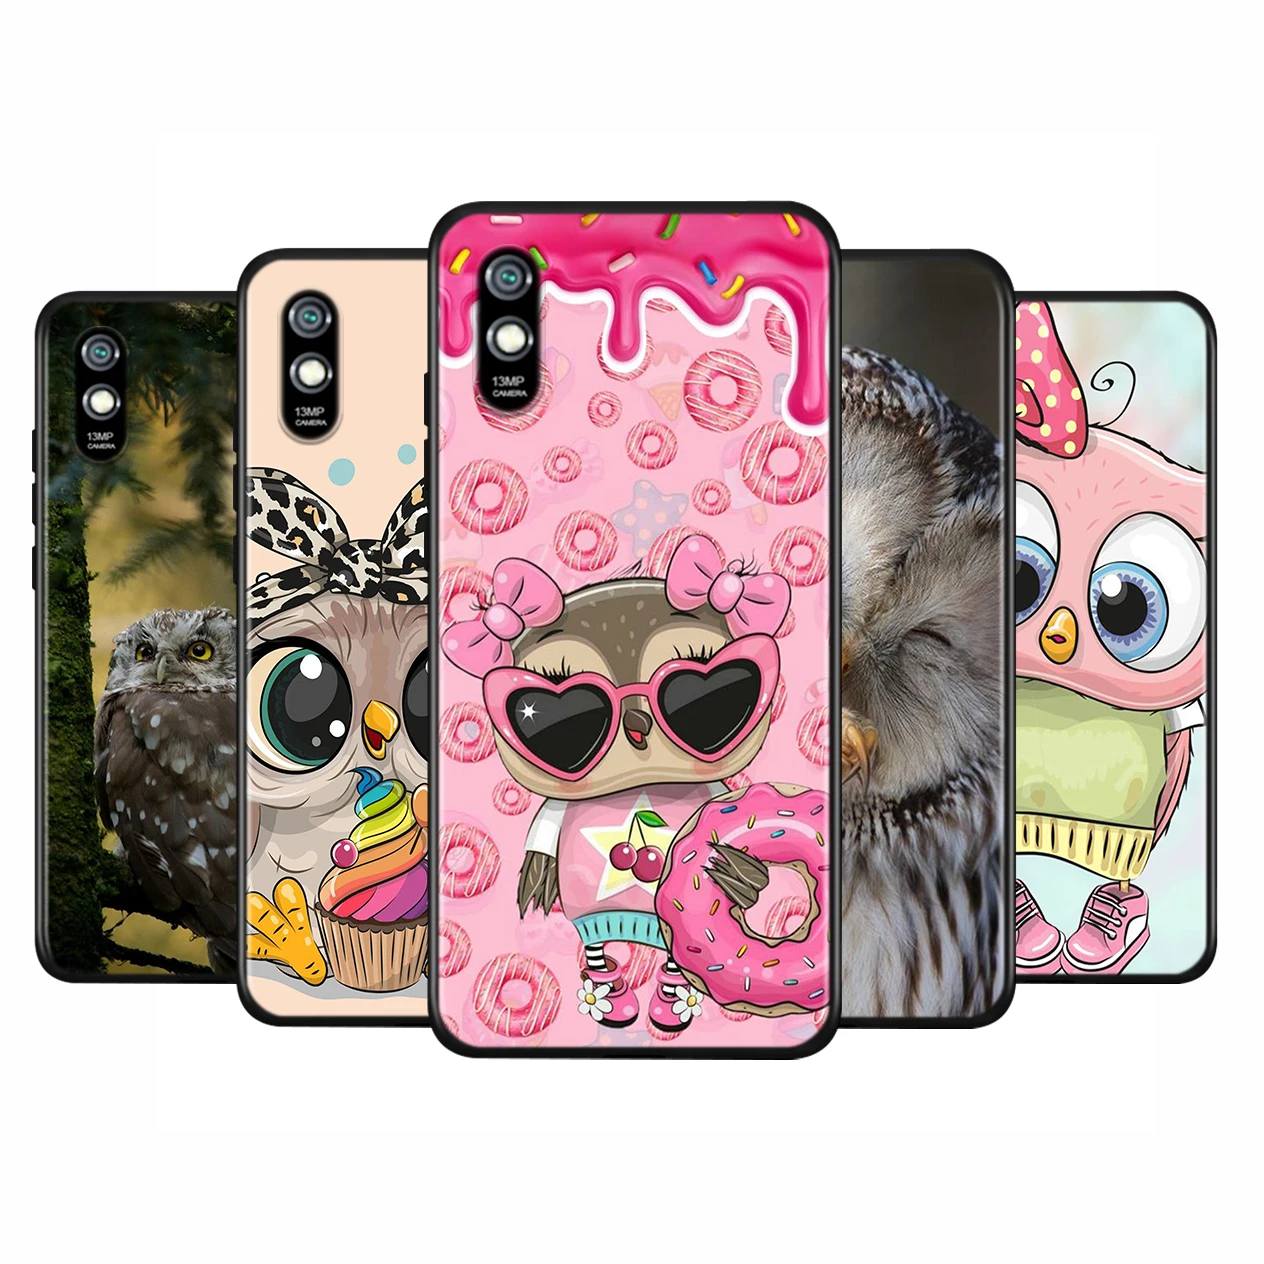 

Silicone Cover Lovely Animal Owl For Xiaomi Redmi 10X 9 9T 9C 8 7 6 Pro 9AT 9A 8A 7A 6A S2 GO 5 5A 4X Plus Phone Case Shell